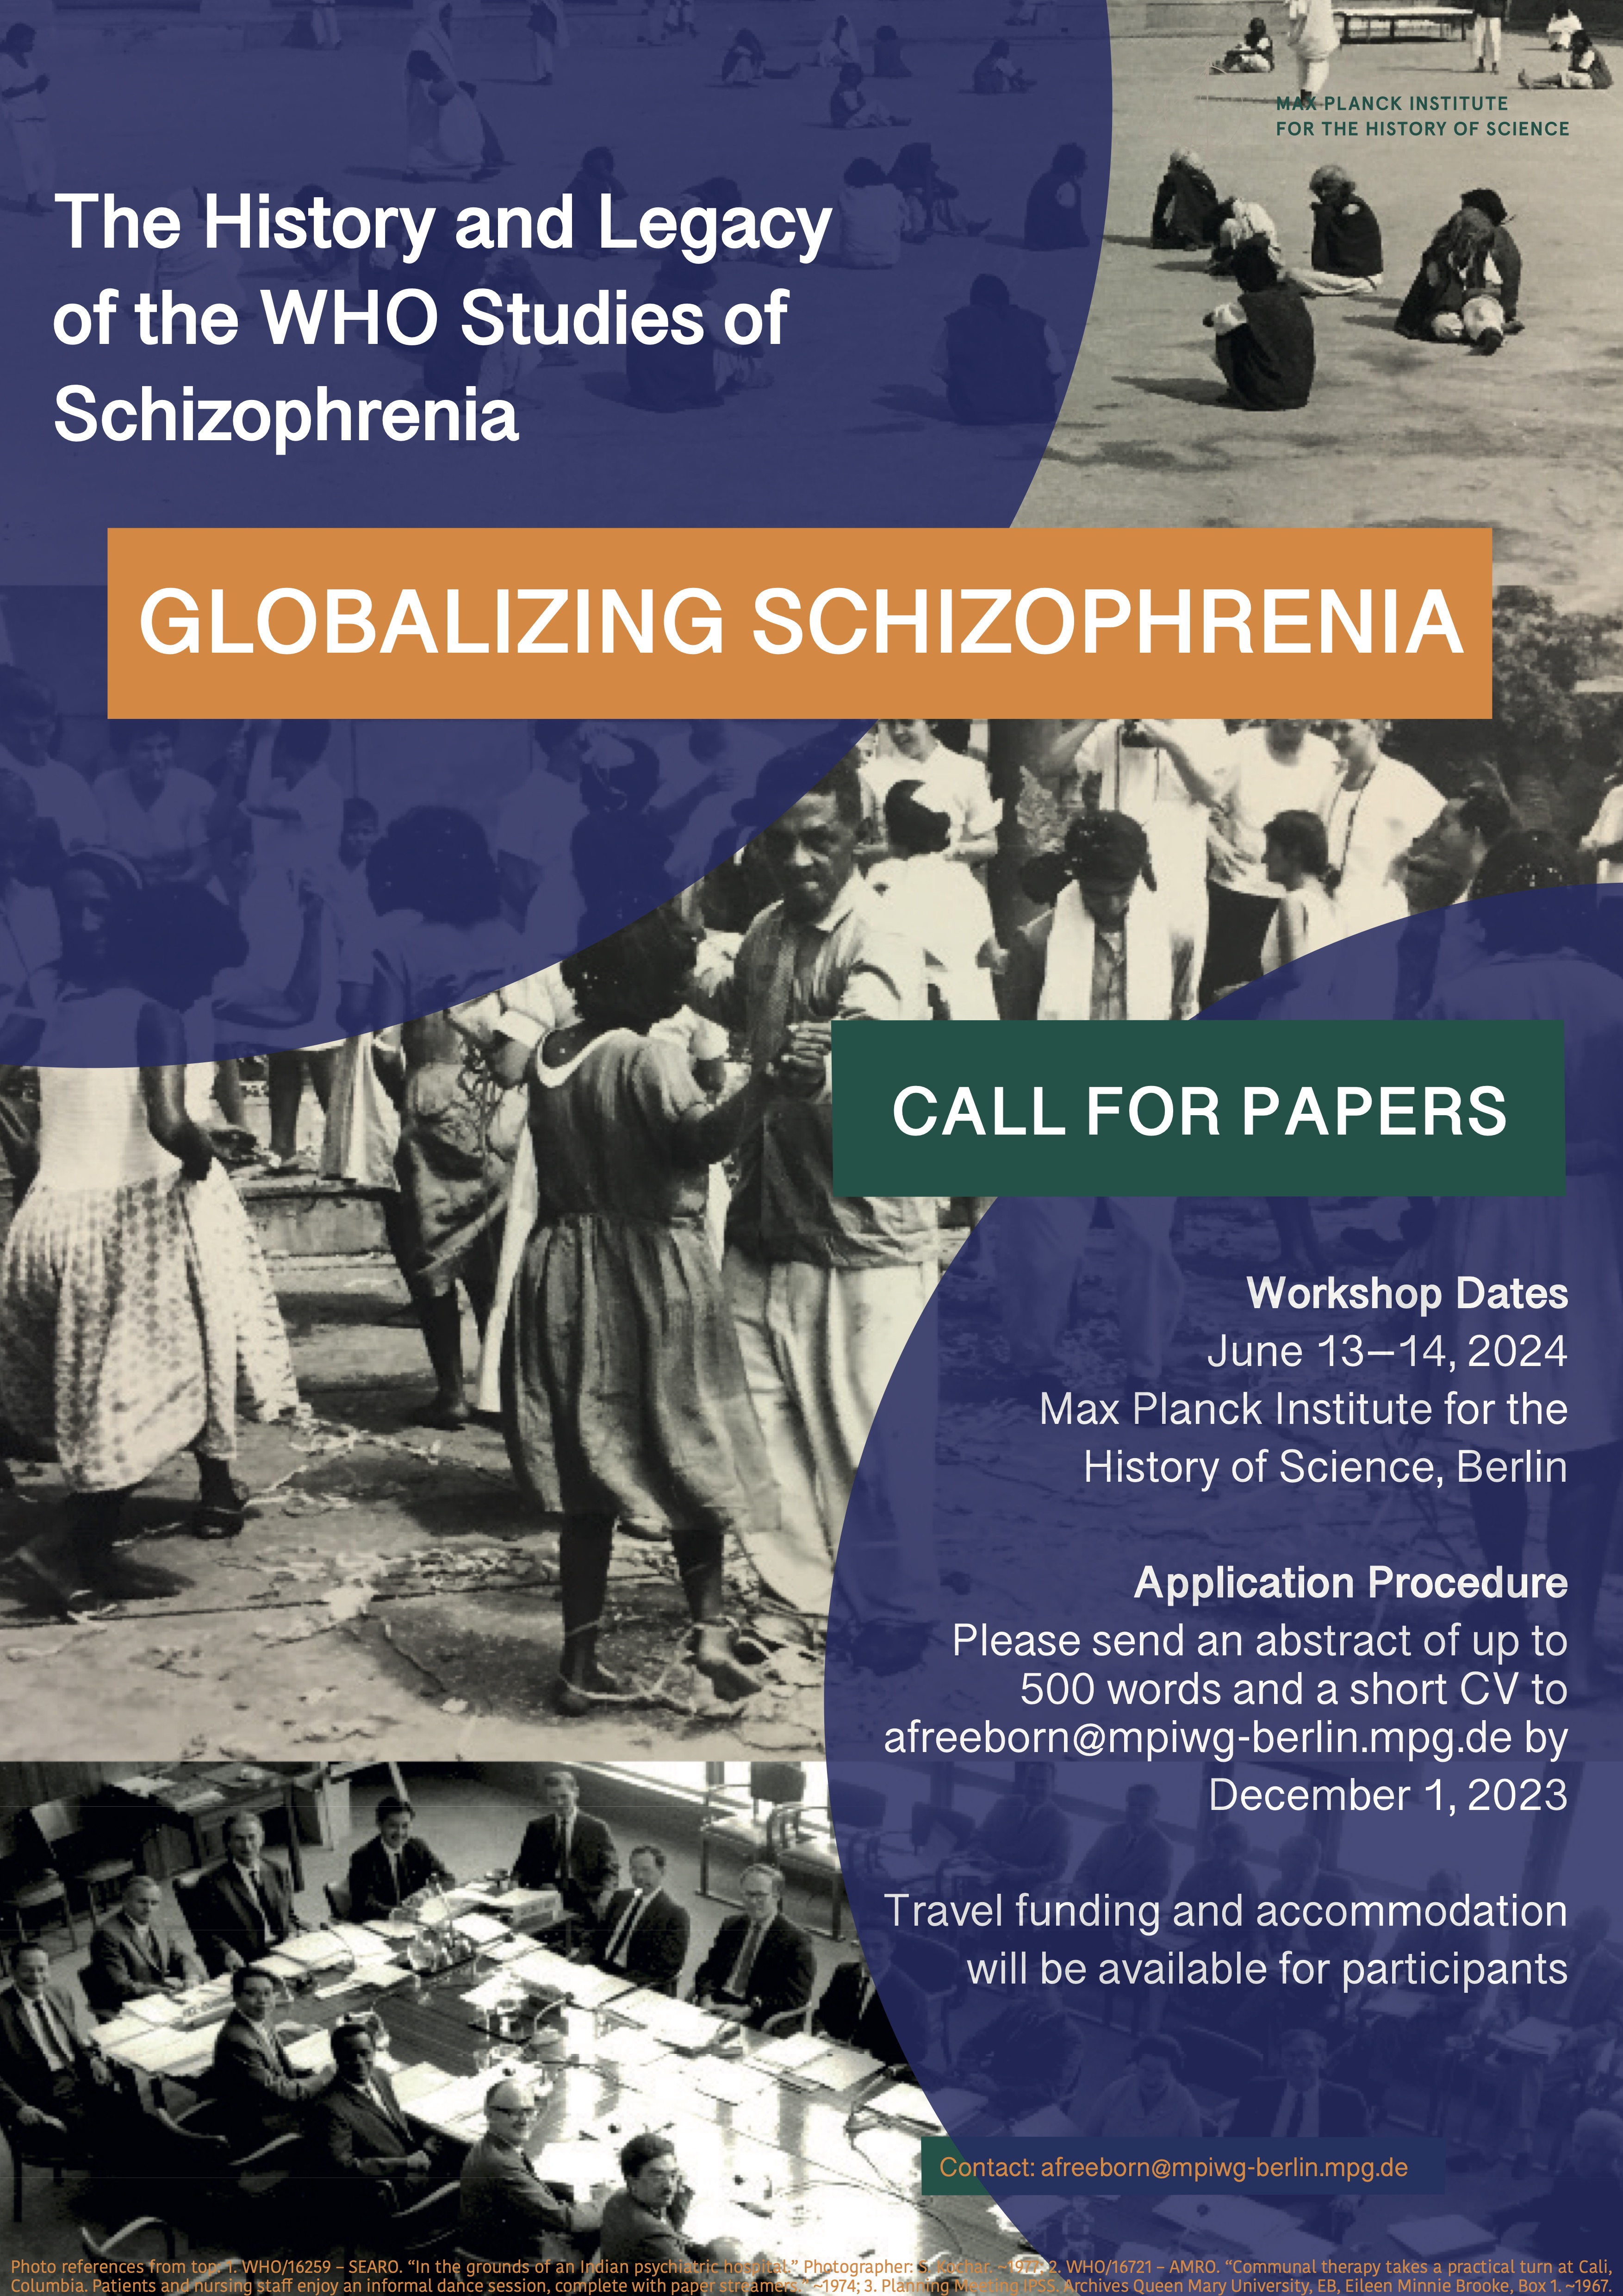 Flyer for the Globalizing Schizophrenia Workshop, contains the information already provided on the webpage